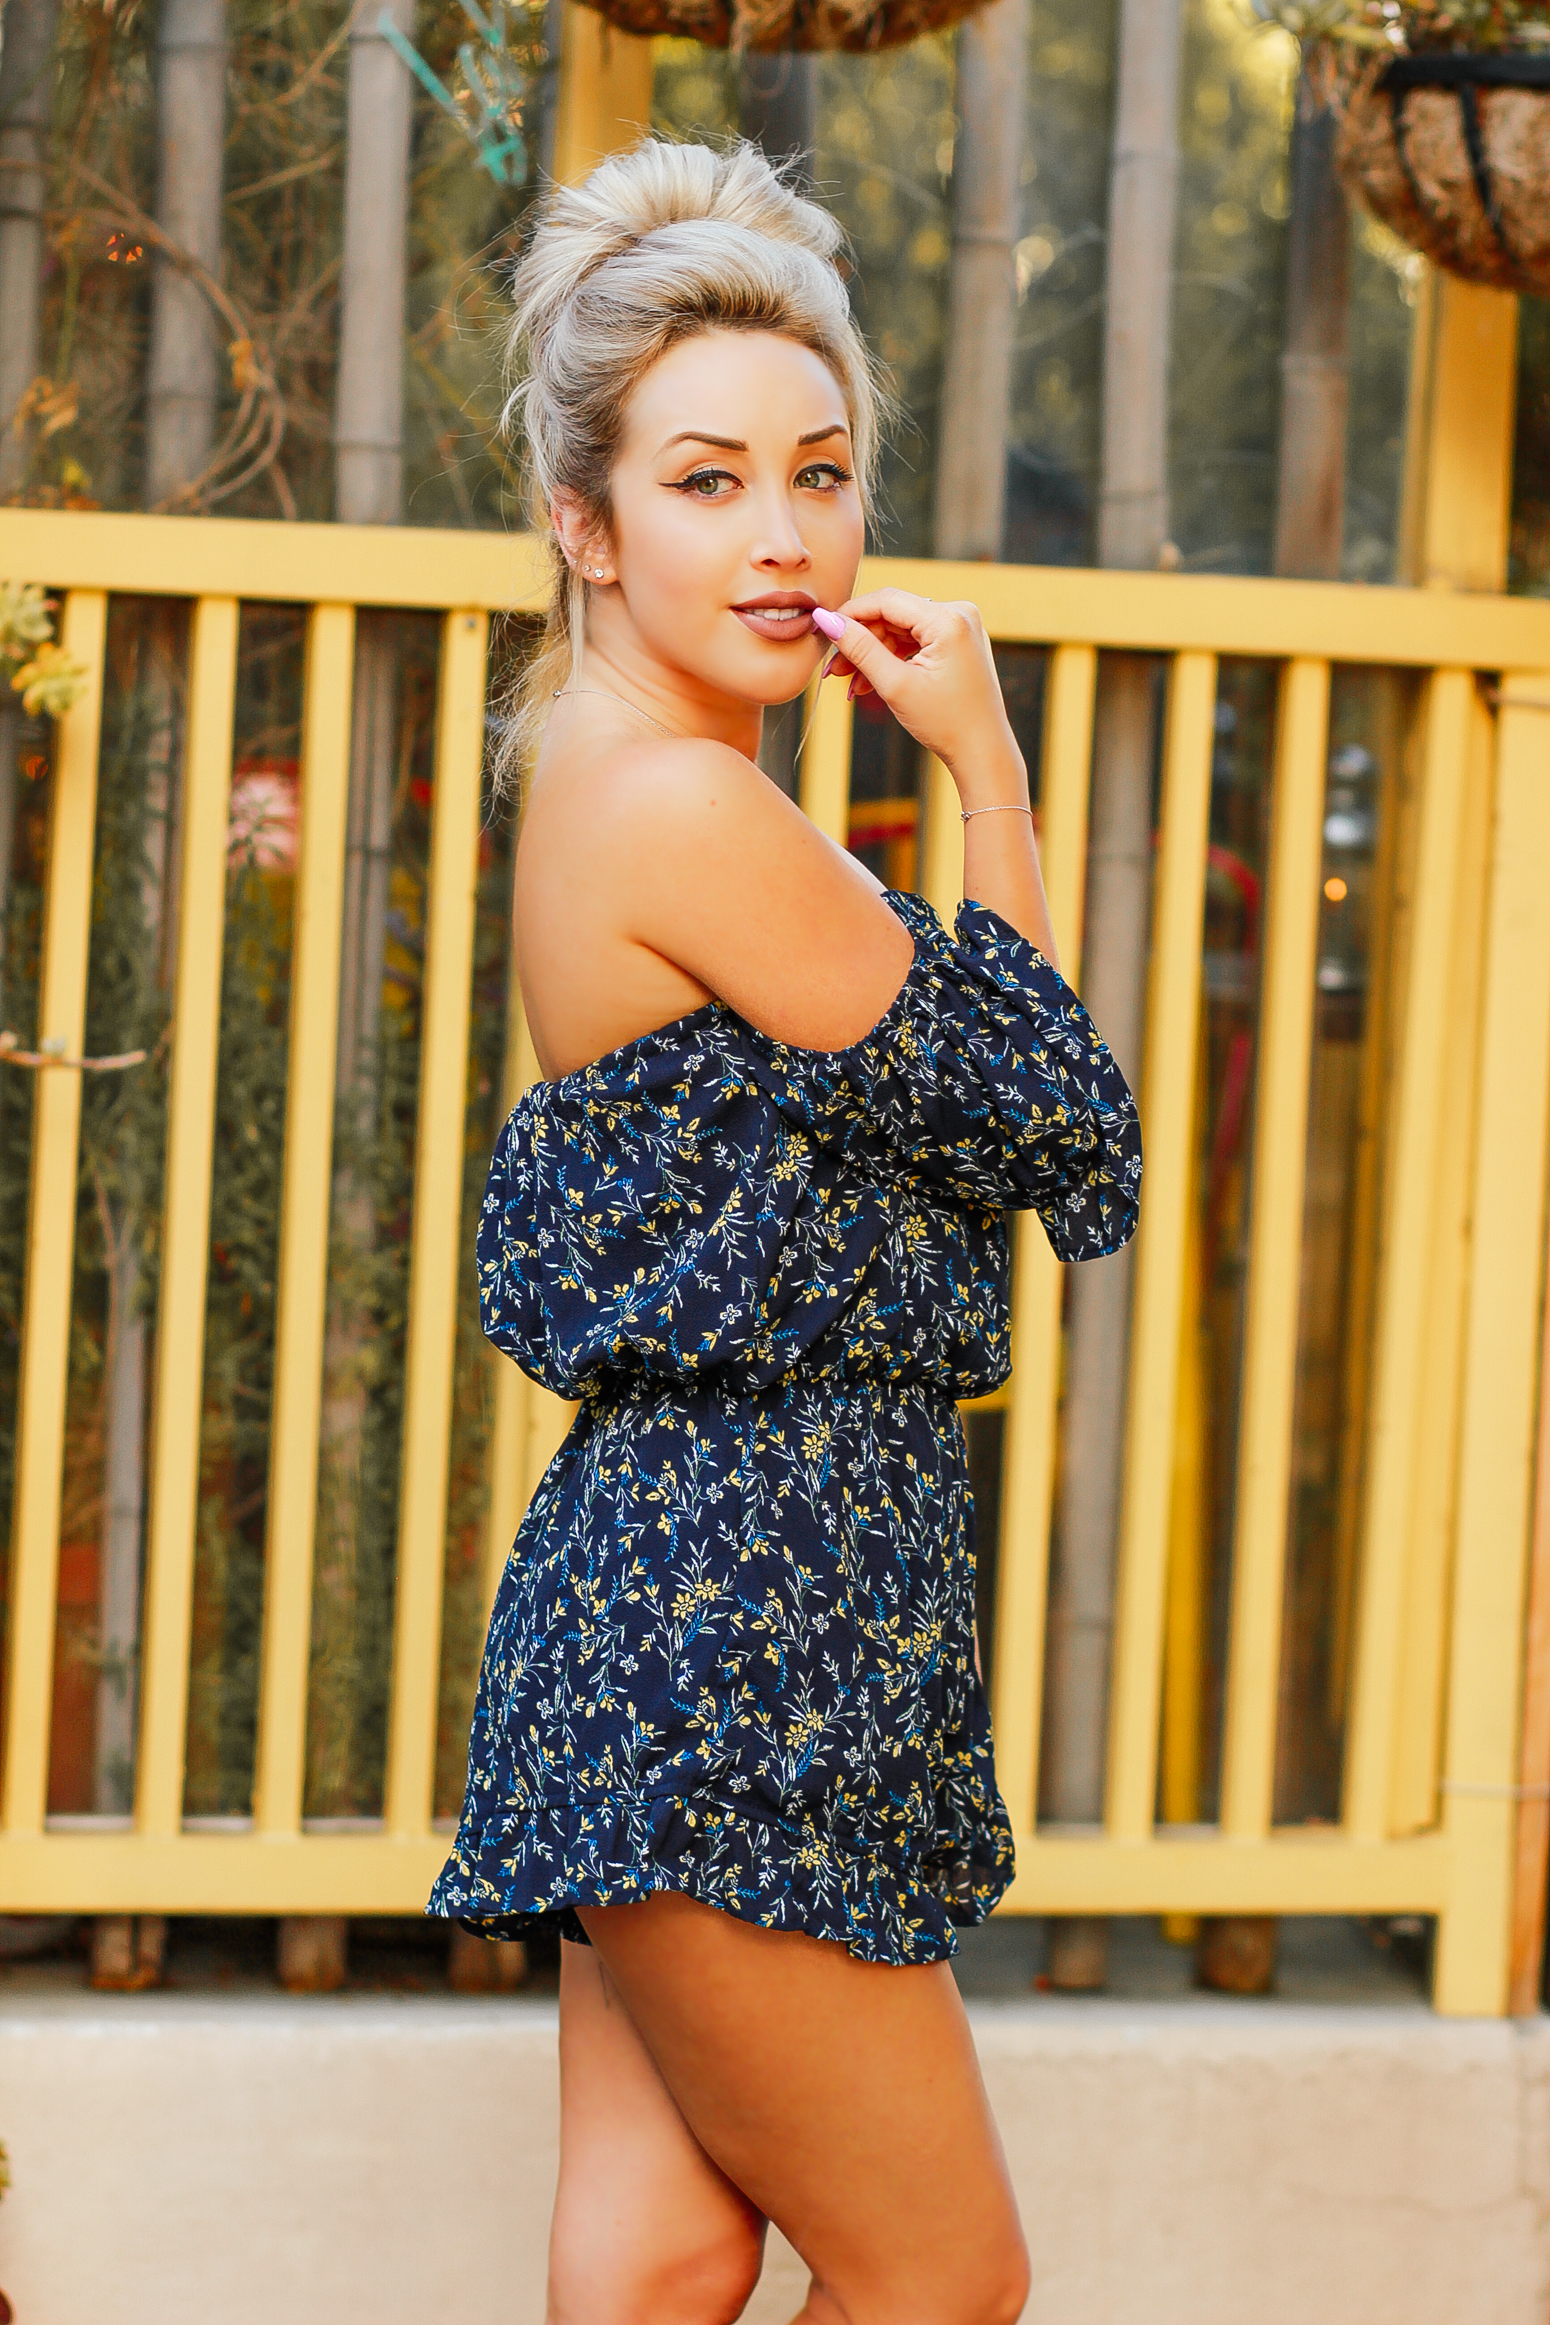 Blondie in the City | Navy Blue, Yellow Floral Romper | Summer Fashion | Cute Summer Outfit